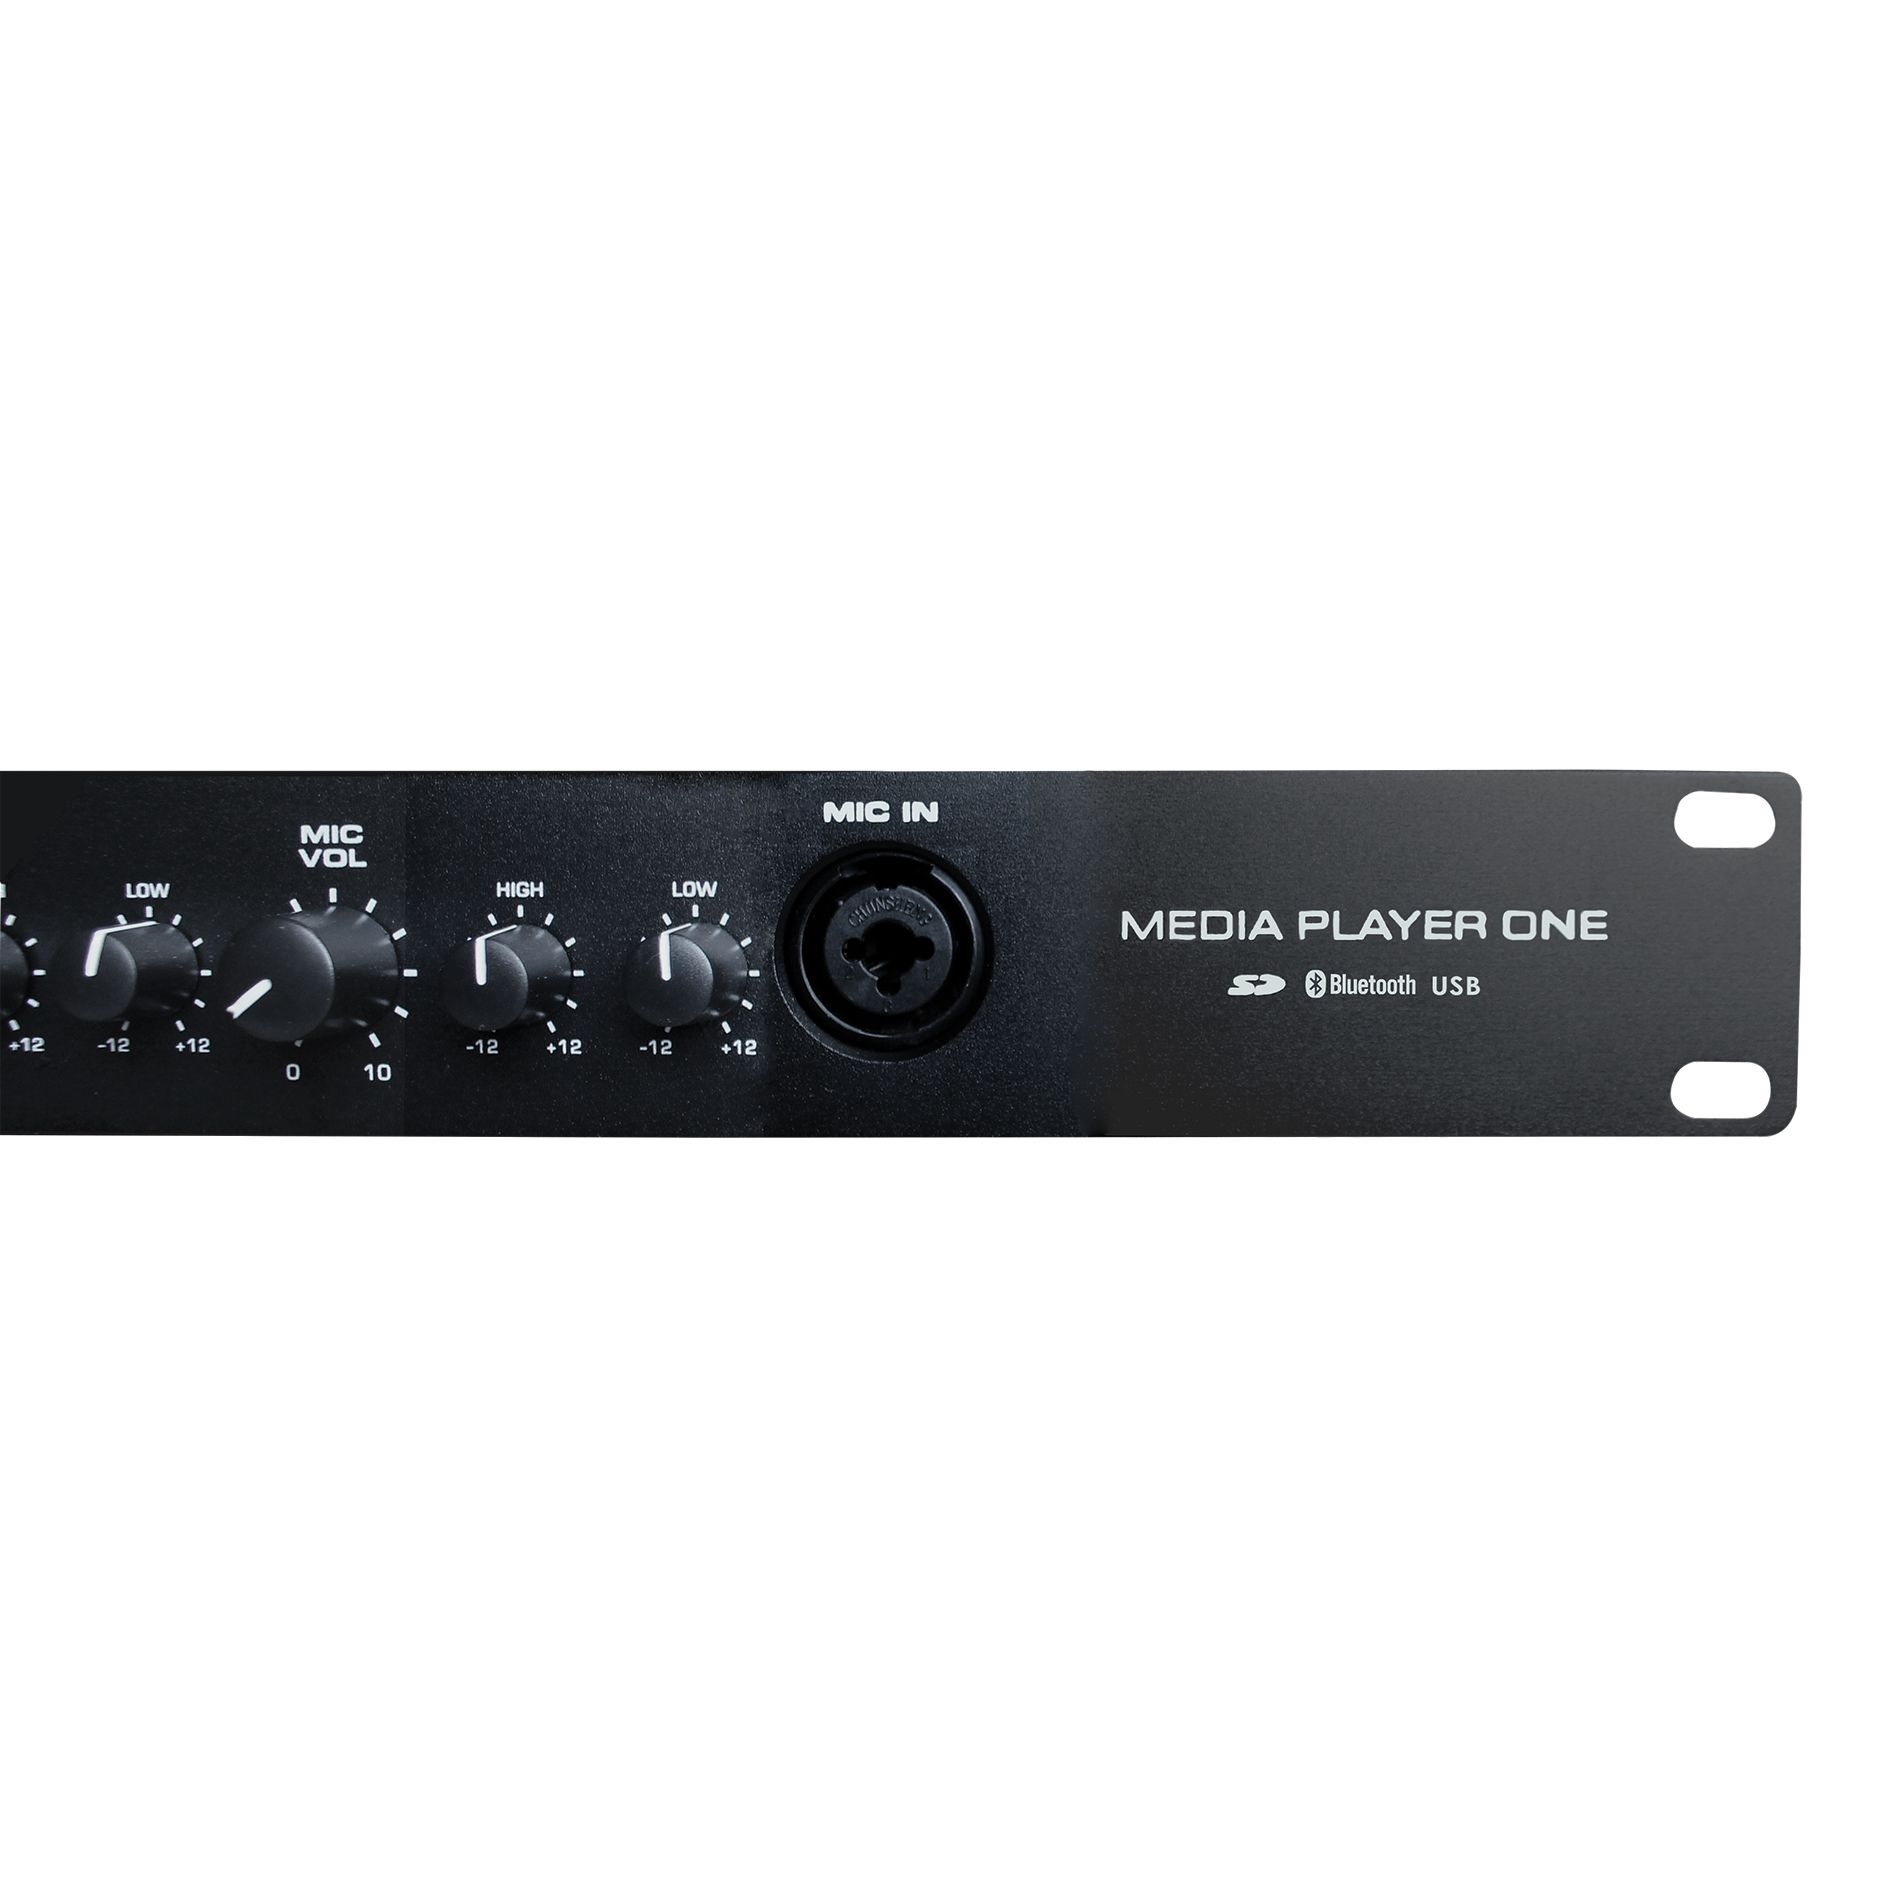 Definitive Audio Media Player One - CD Recorder in rack - Variation 1